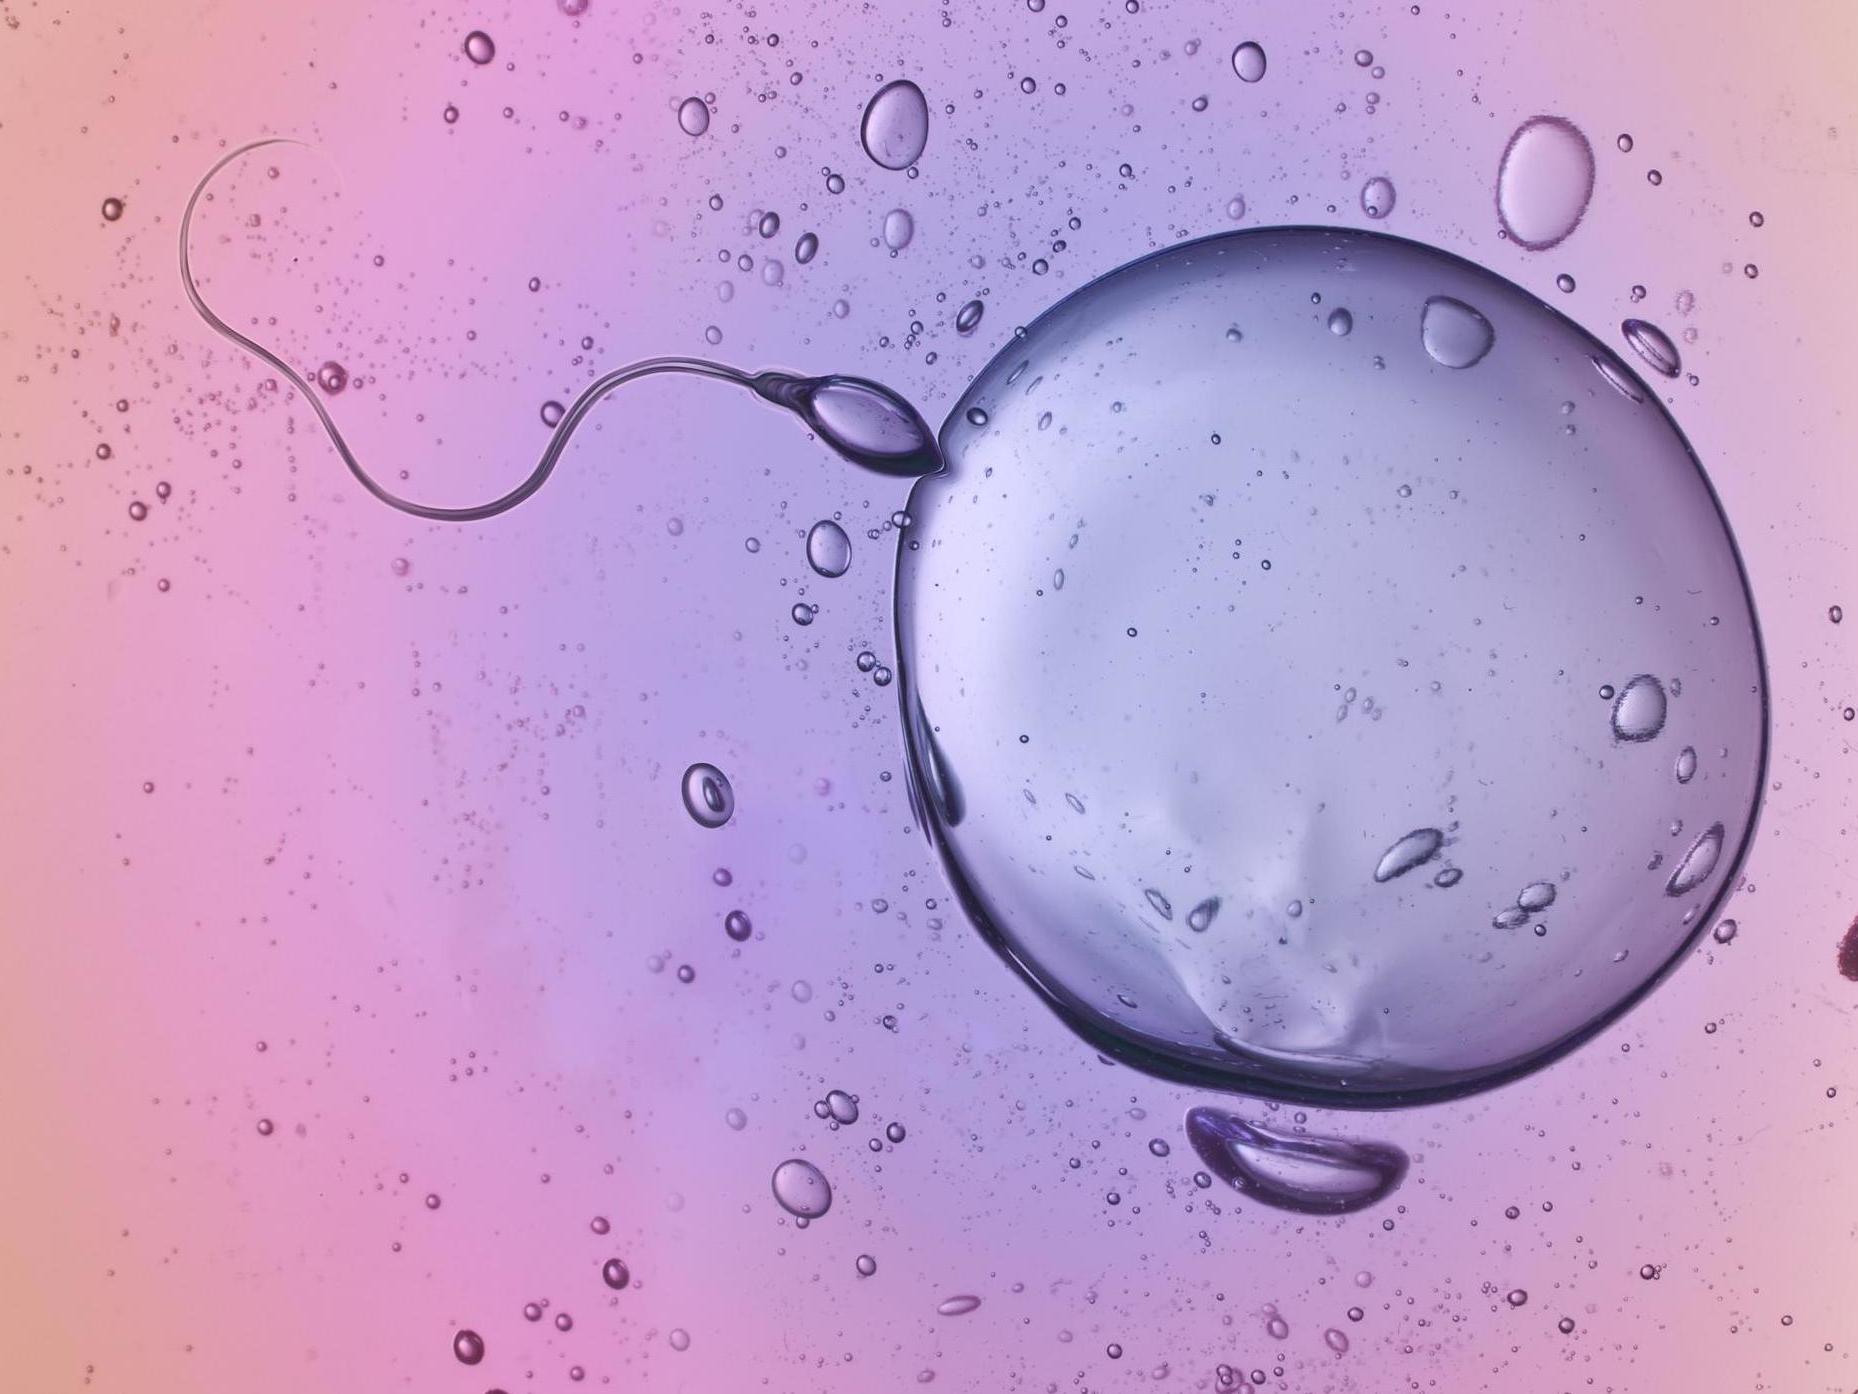 Sperm quality can affect the development of the placenta, which feeds nutrients and oxygen to the foetus